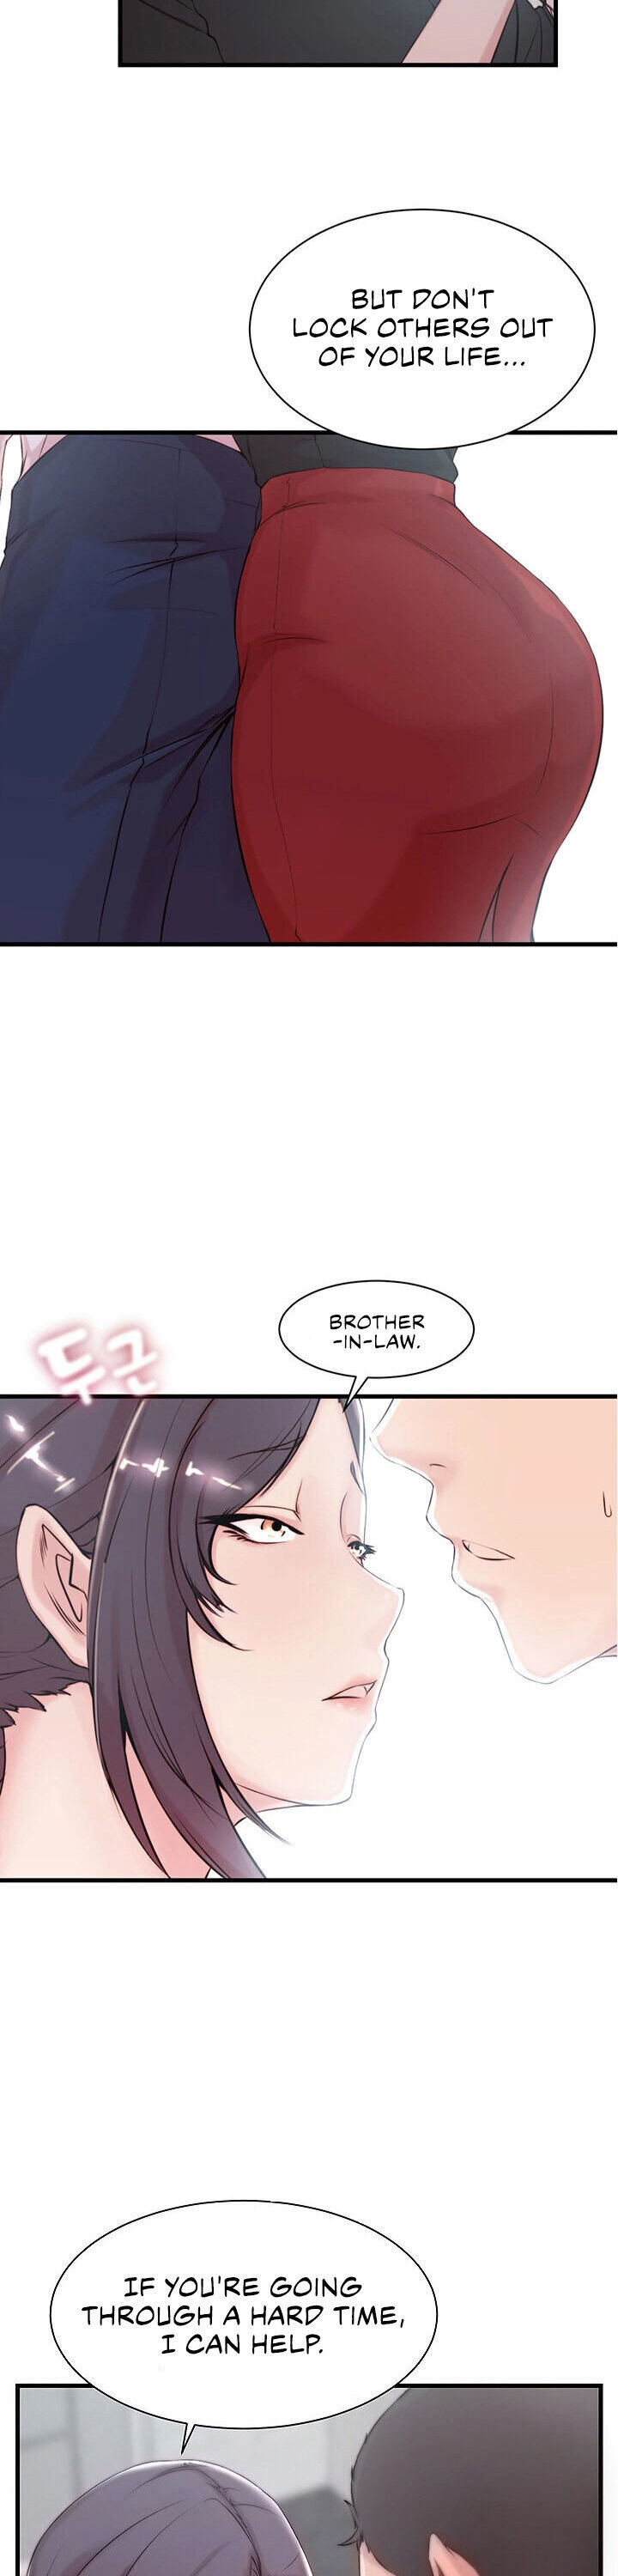 Sister-in-Law Manhwa - Chapter 3 Page 6